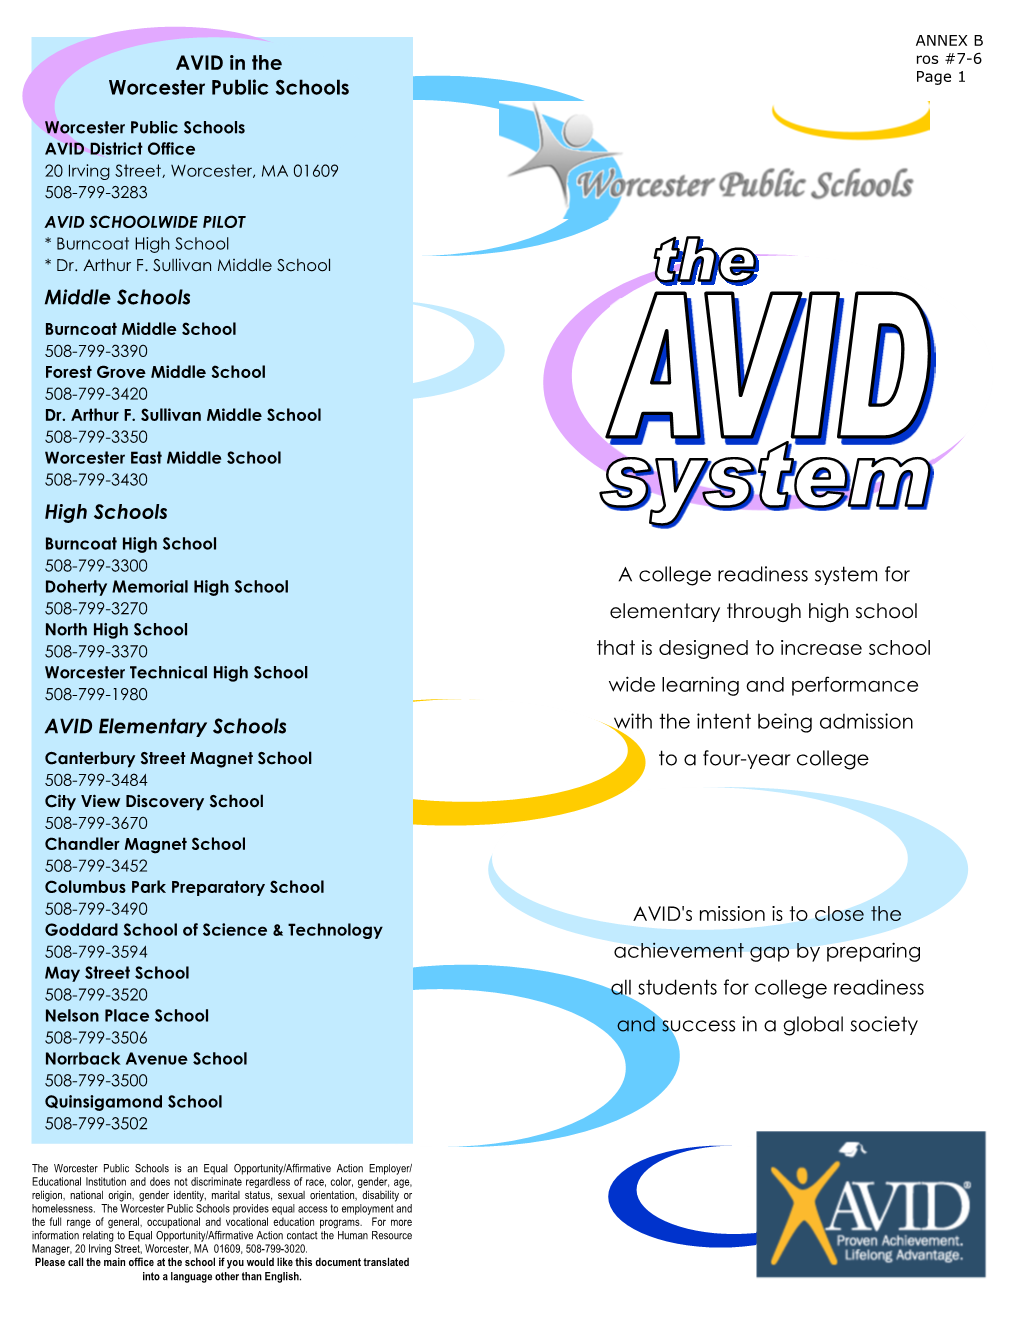 AVID's Mission Is to Close the Achievement Gap by Preparing All